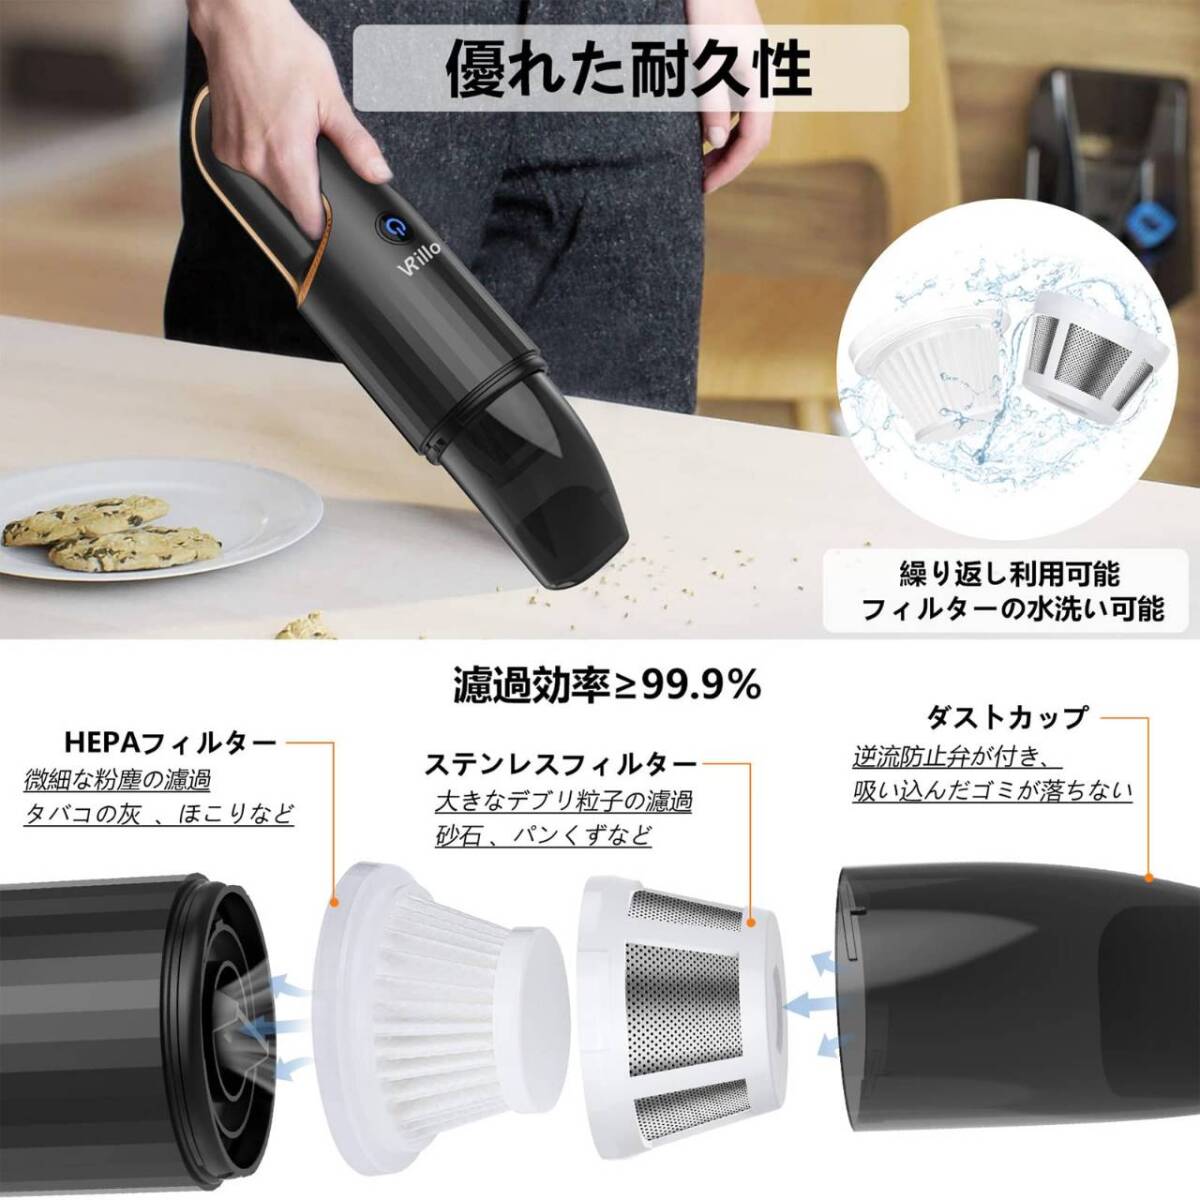  small size cordless vacuum cleaner desk hand cleaner Mini cleaner 